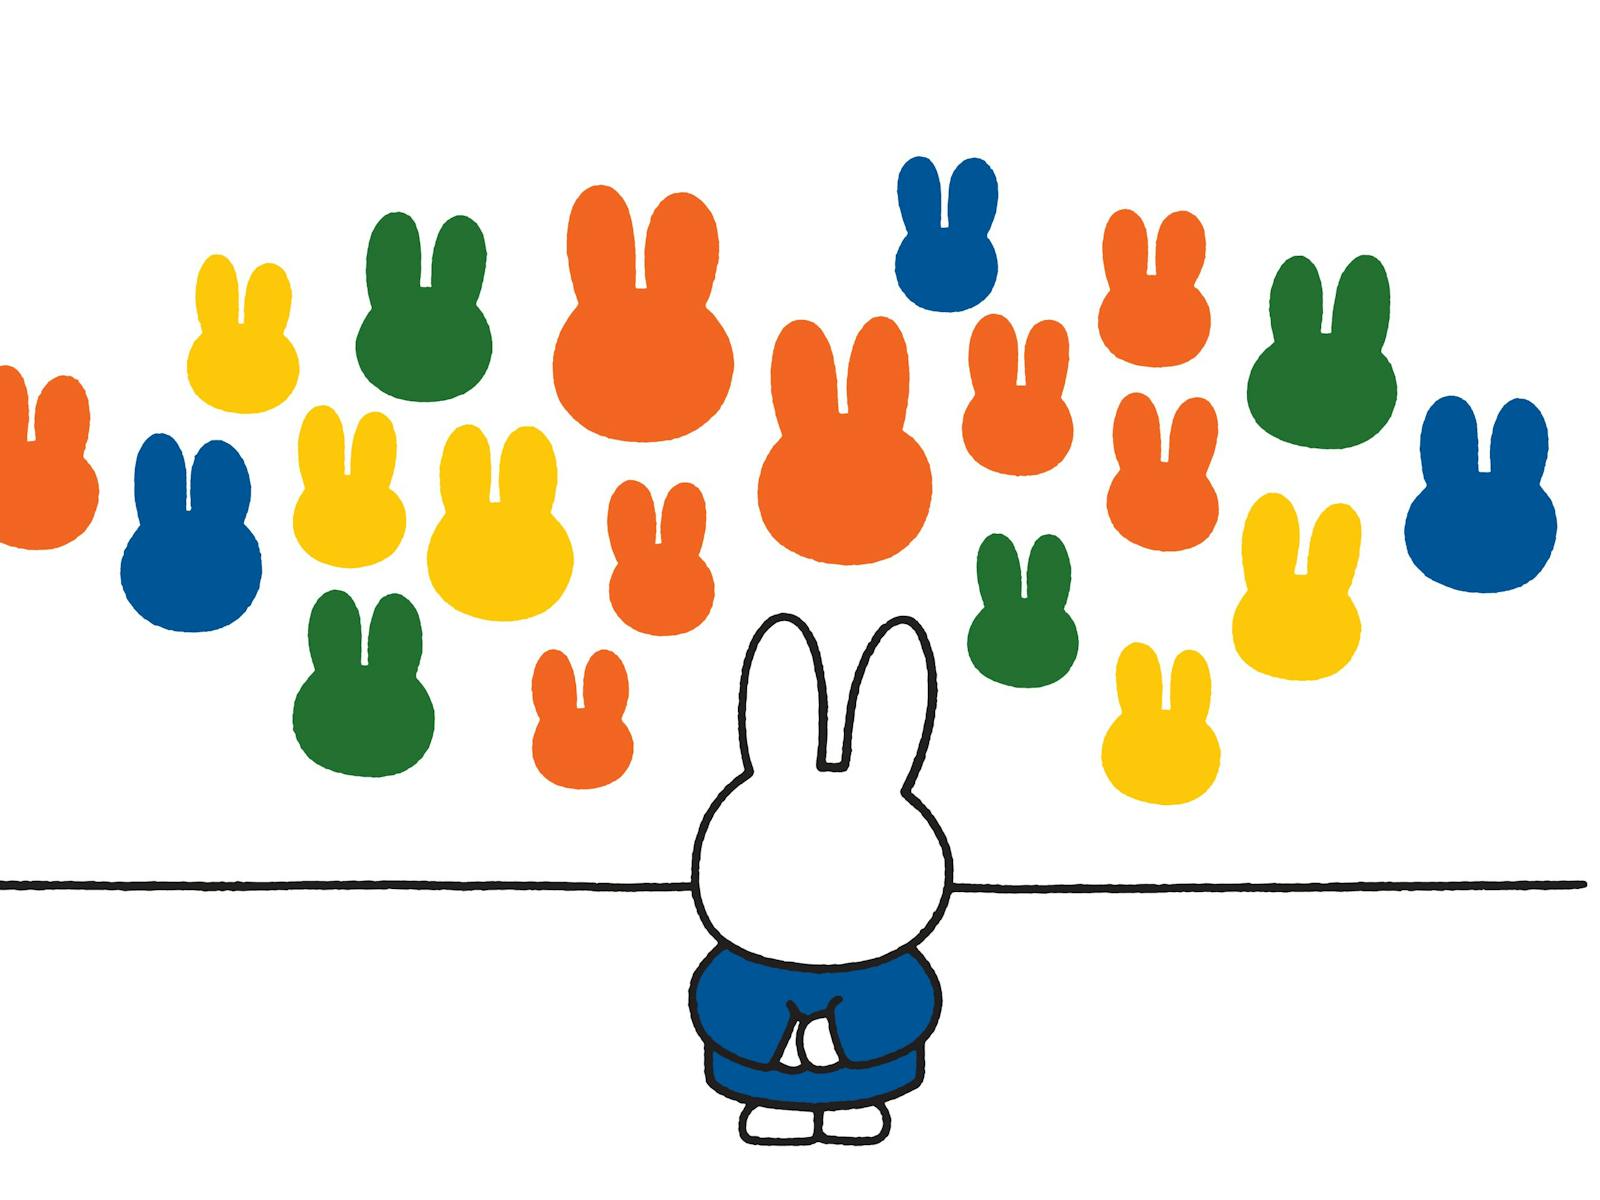 Image for miffy & friends at Bunjil Place Gallery